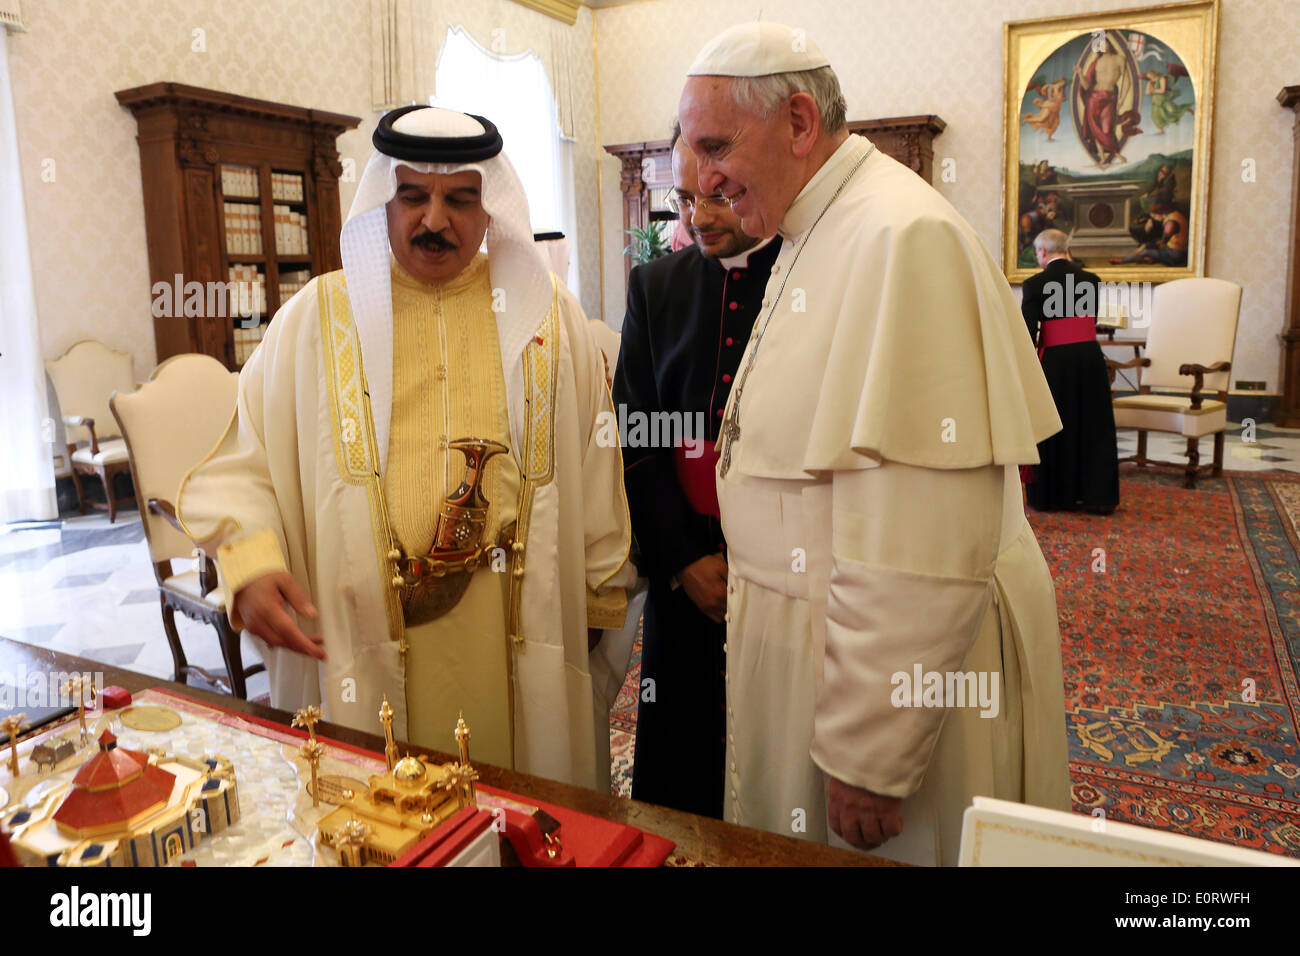 Vatican City. 19th May, 2014. Pope Francis meets with the King of Bahrain, Isa S.M AL KHALIFA The King of Bahrain, has presented to Pope Francis, the model of a mosque made of gold and mother of pearl. Credit:  Realy Easy Star/Alamy Live News Stock Photo